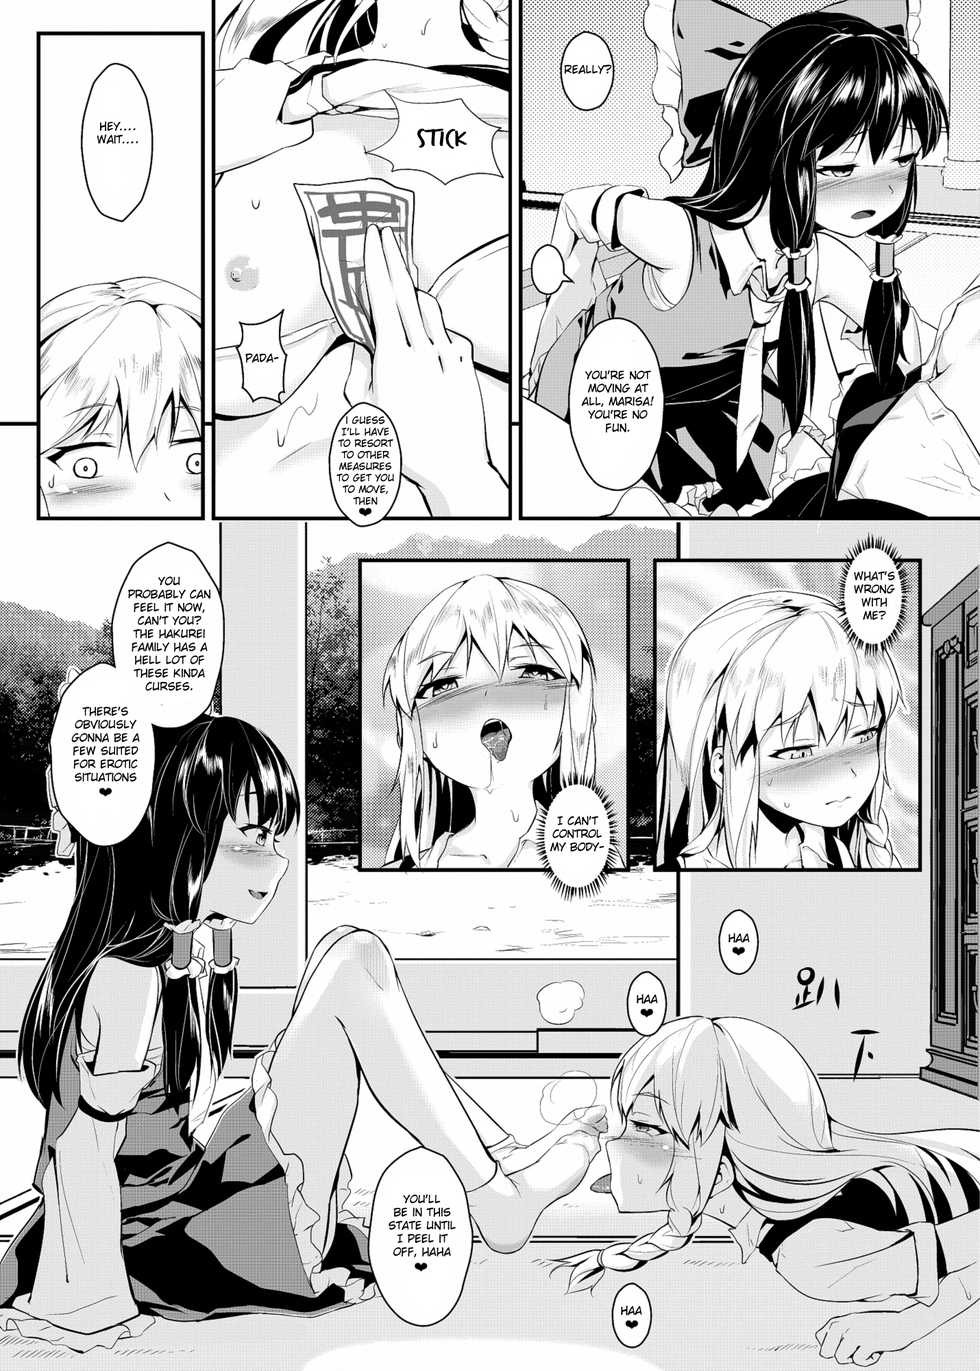 [Chen Bin] Sweet Summer's Day with Marisa [English] [GMDTranslations] - Page 7